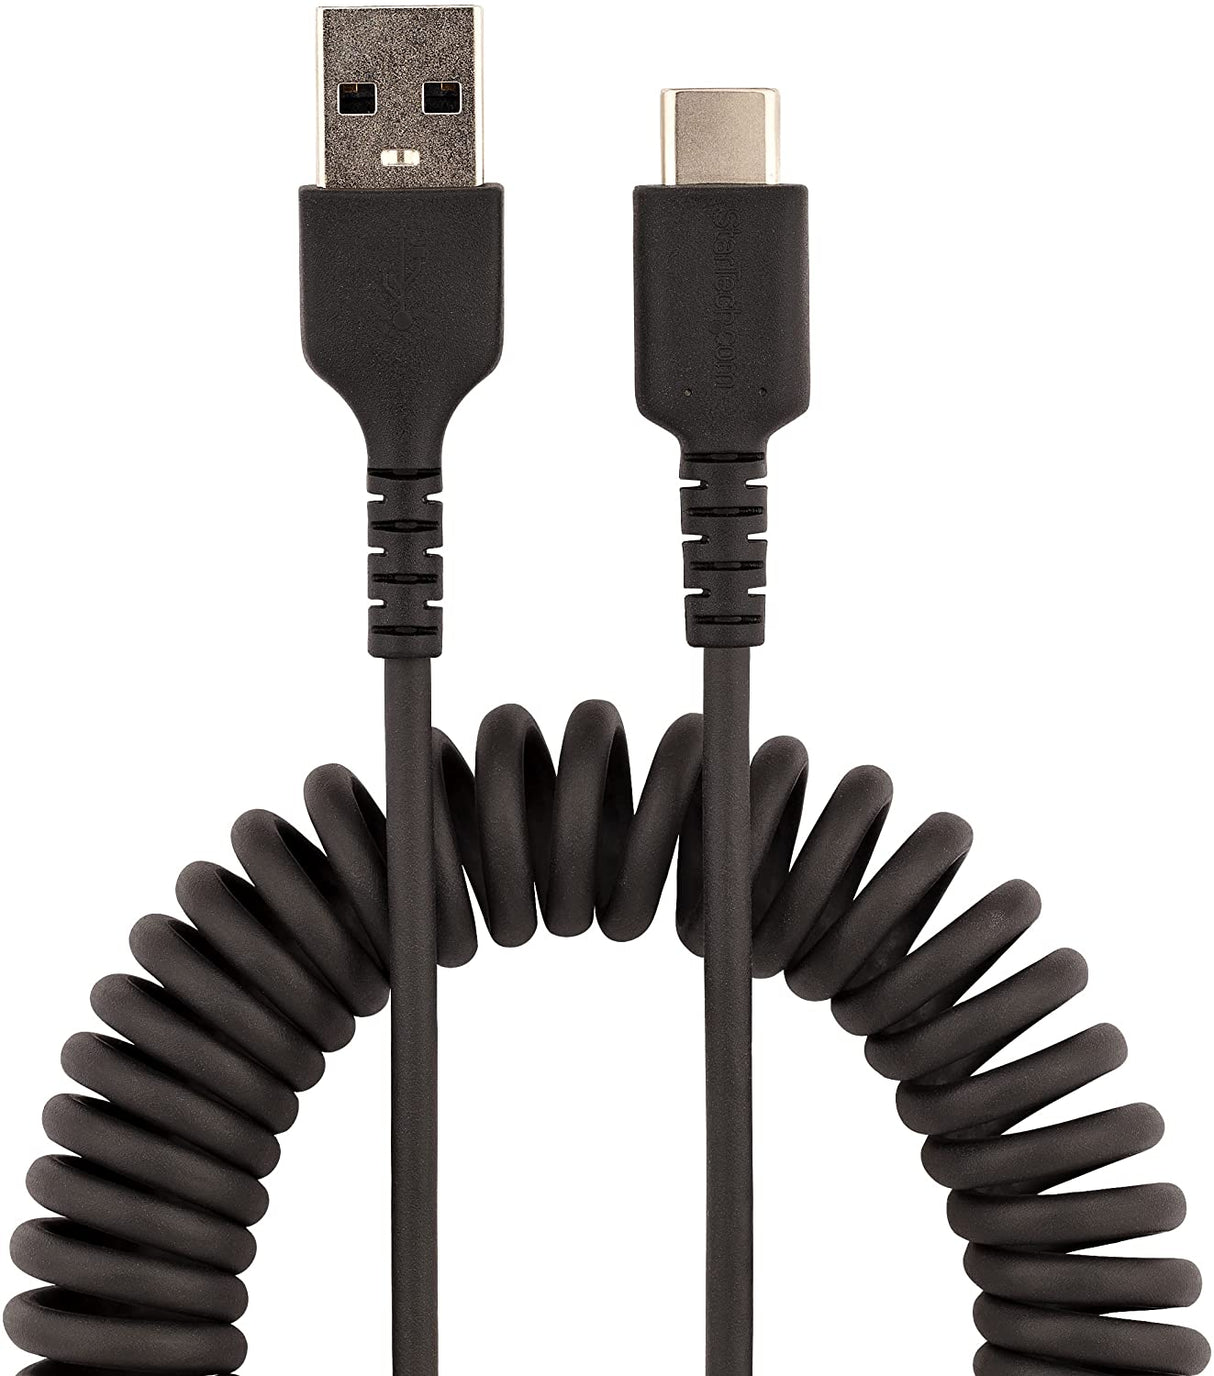 StarTech.com 20in (50cm) USB A to C Charging Cable, Coiled Heavy Duty Fast Charge &amp; Sync USB-C Cable, USB 2.0 A to Type-C Cable, Rugged Aramid Fiber, Durable Male to Male USB (R2ACC-50C-USB-CABLE)